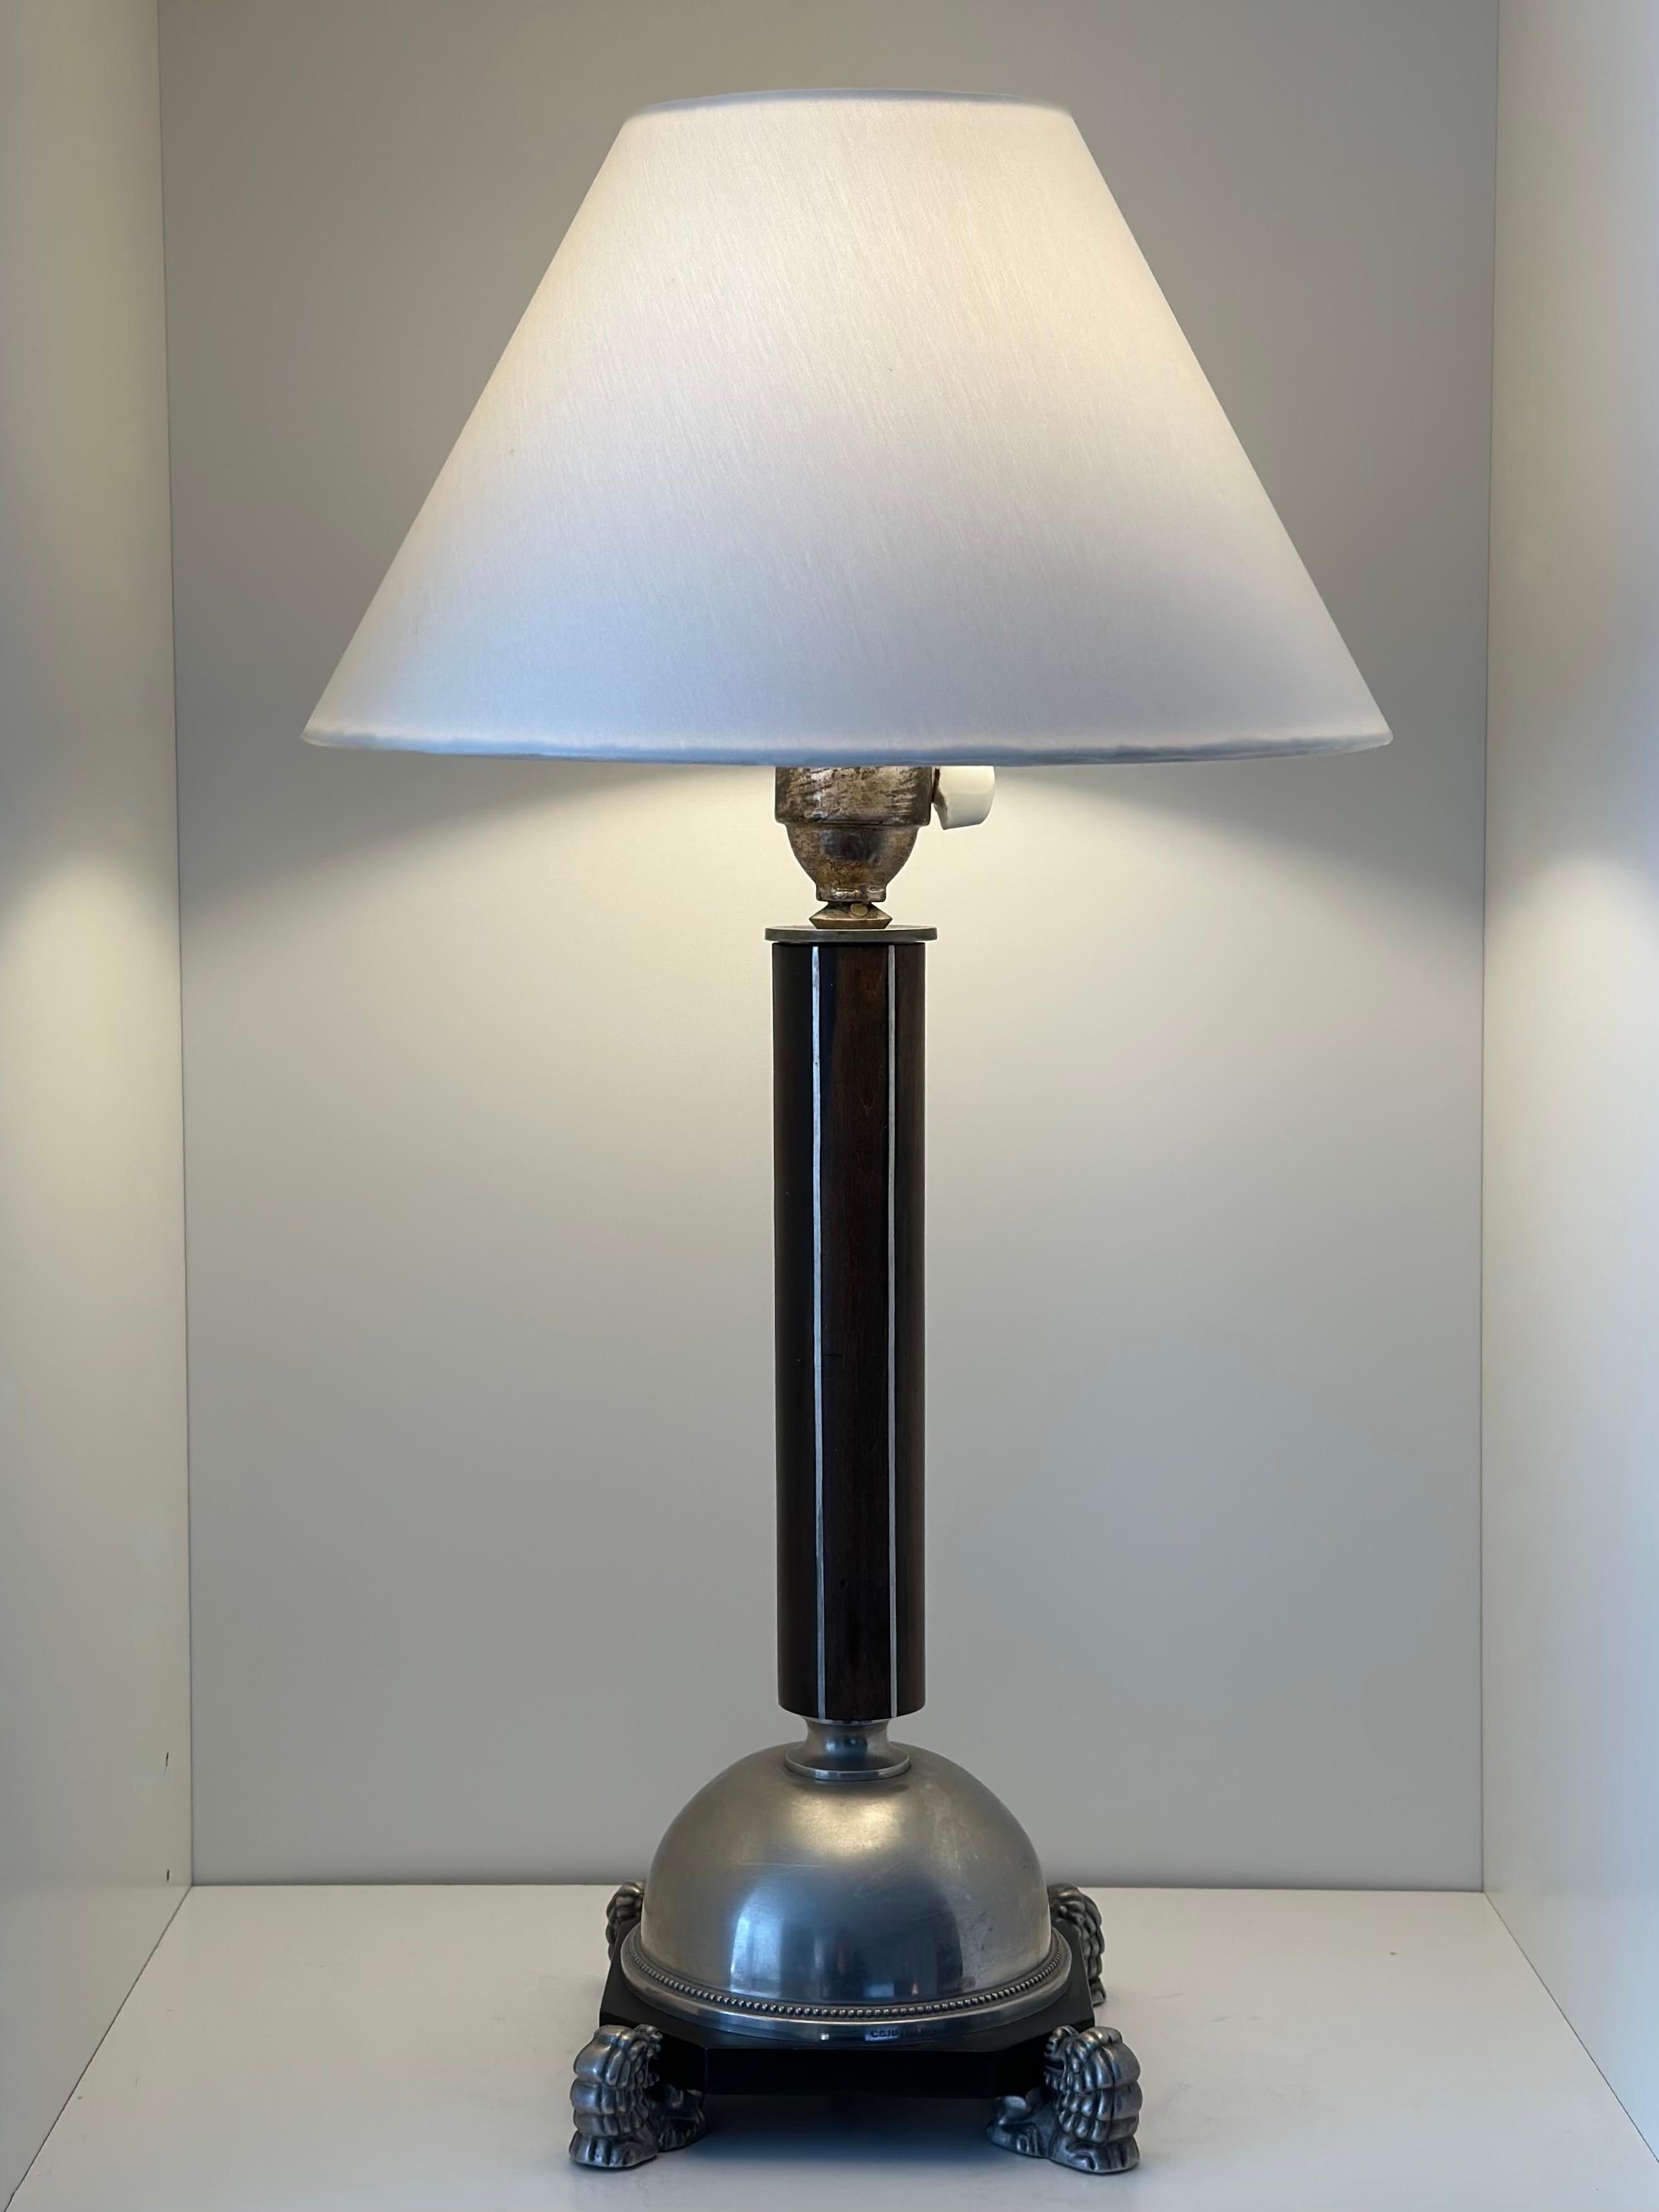 Cast Swedish Grace Pewter Table Lamp Likely by Anna Petrus, C.G. Hallberg, 1930s